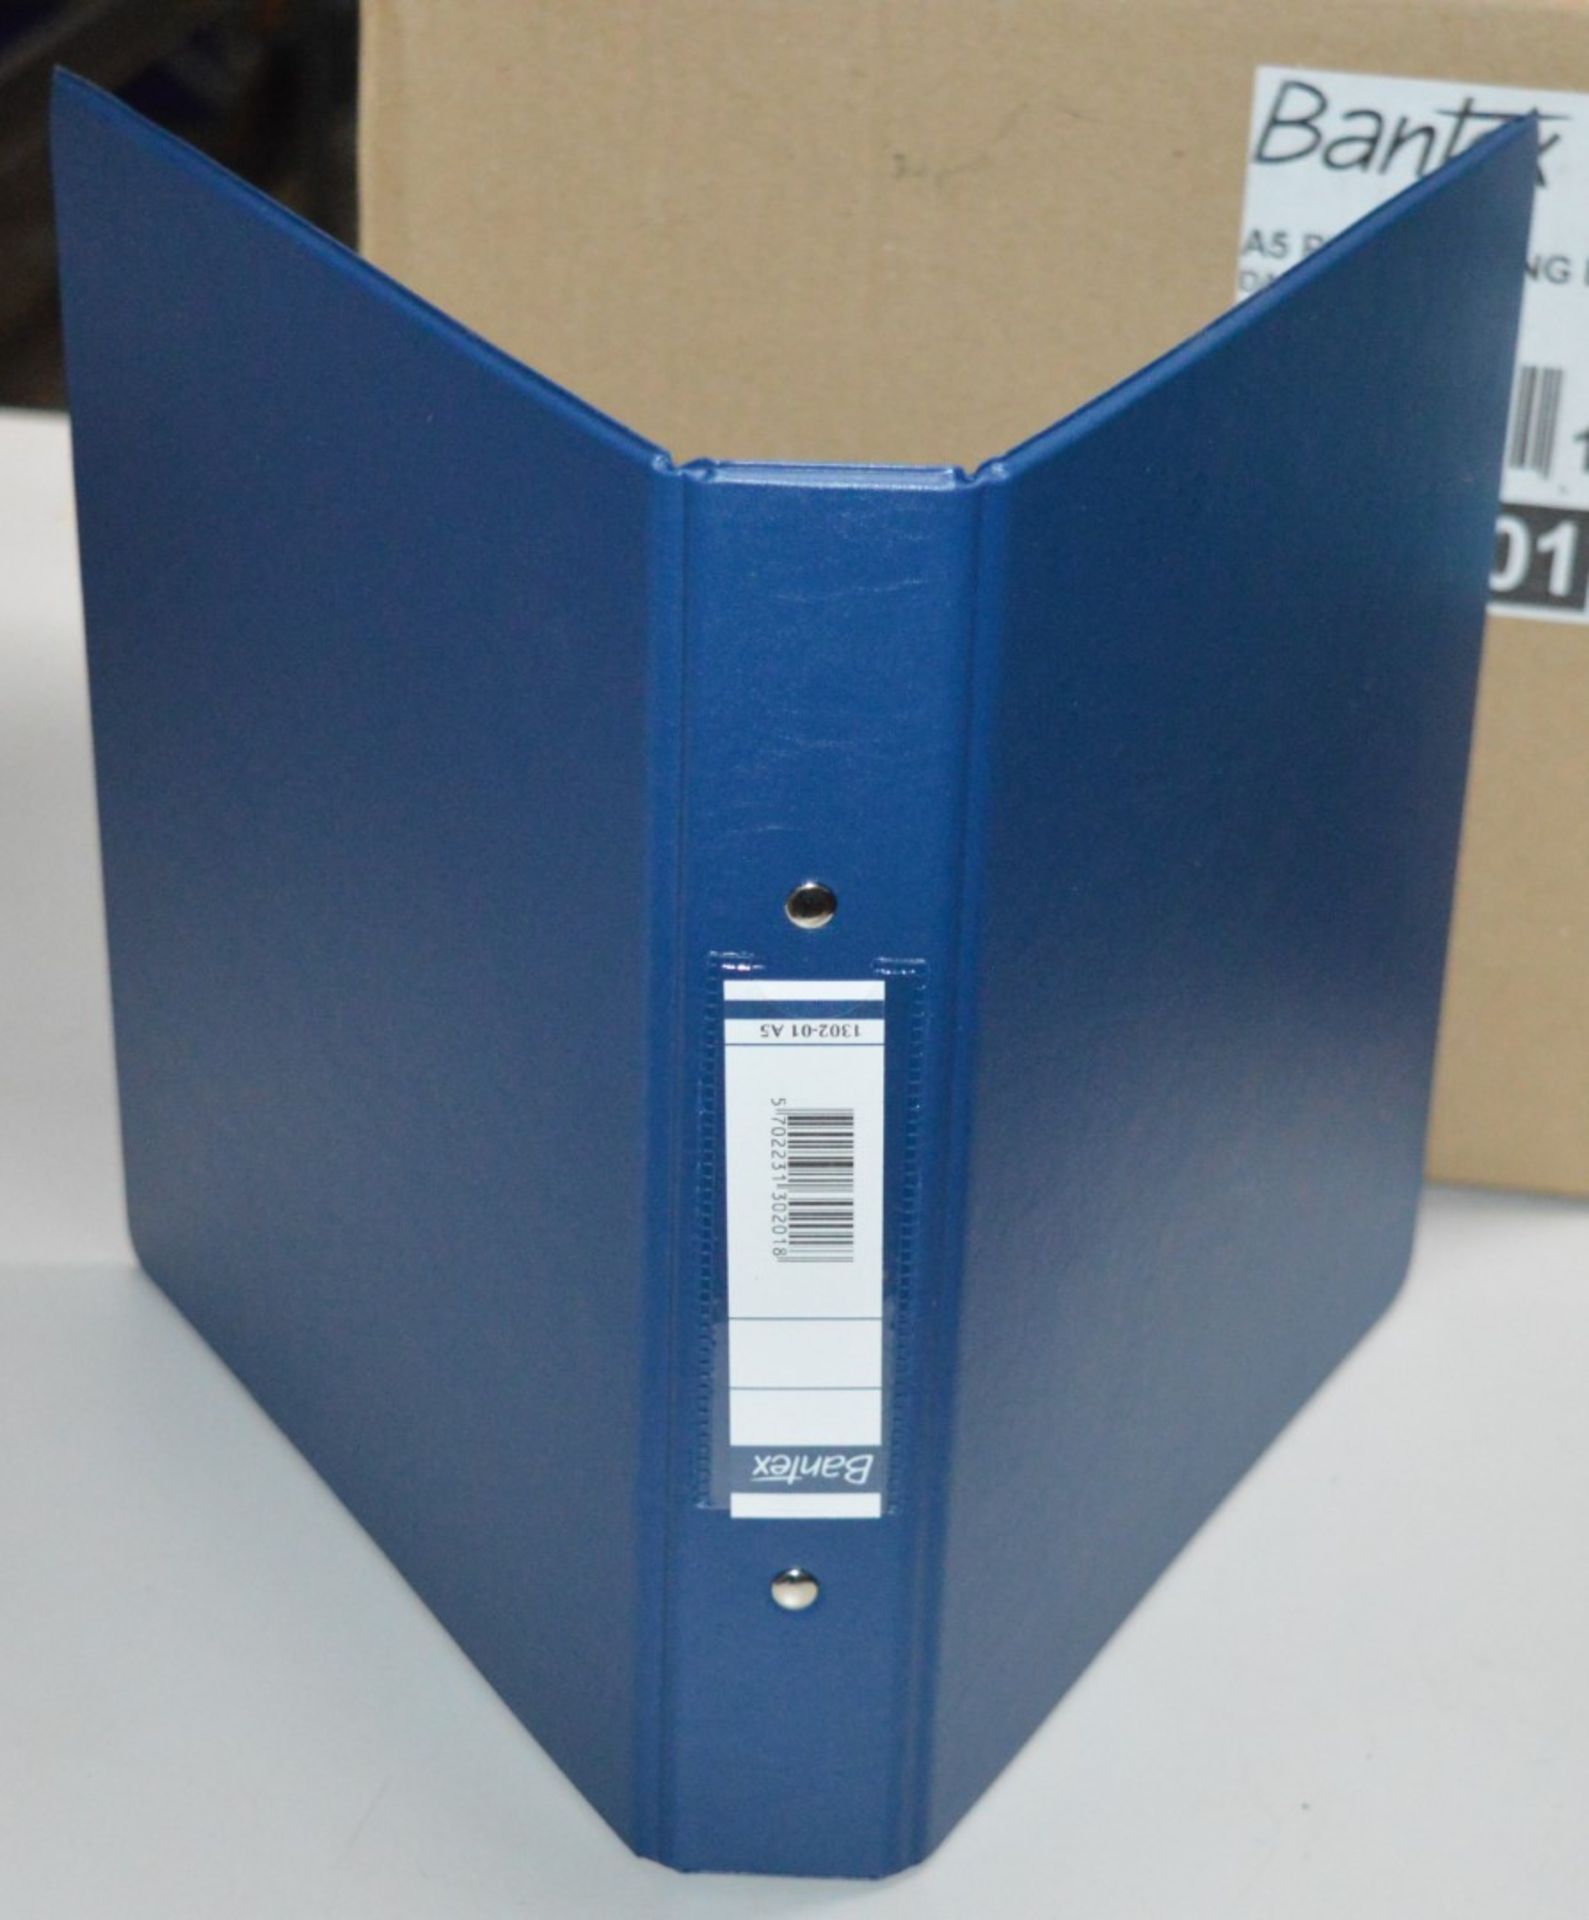 30 x Bantex A5 Plastic Ring Binders - Dark Blue, 2 Ring, 25mm - New Boxed Stock - CL011 - Ref 1302- - Image 2 of 4